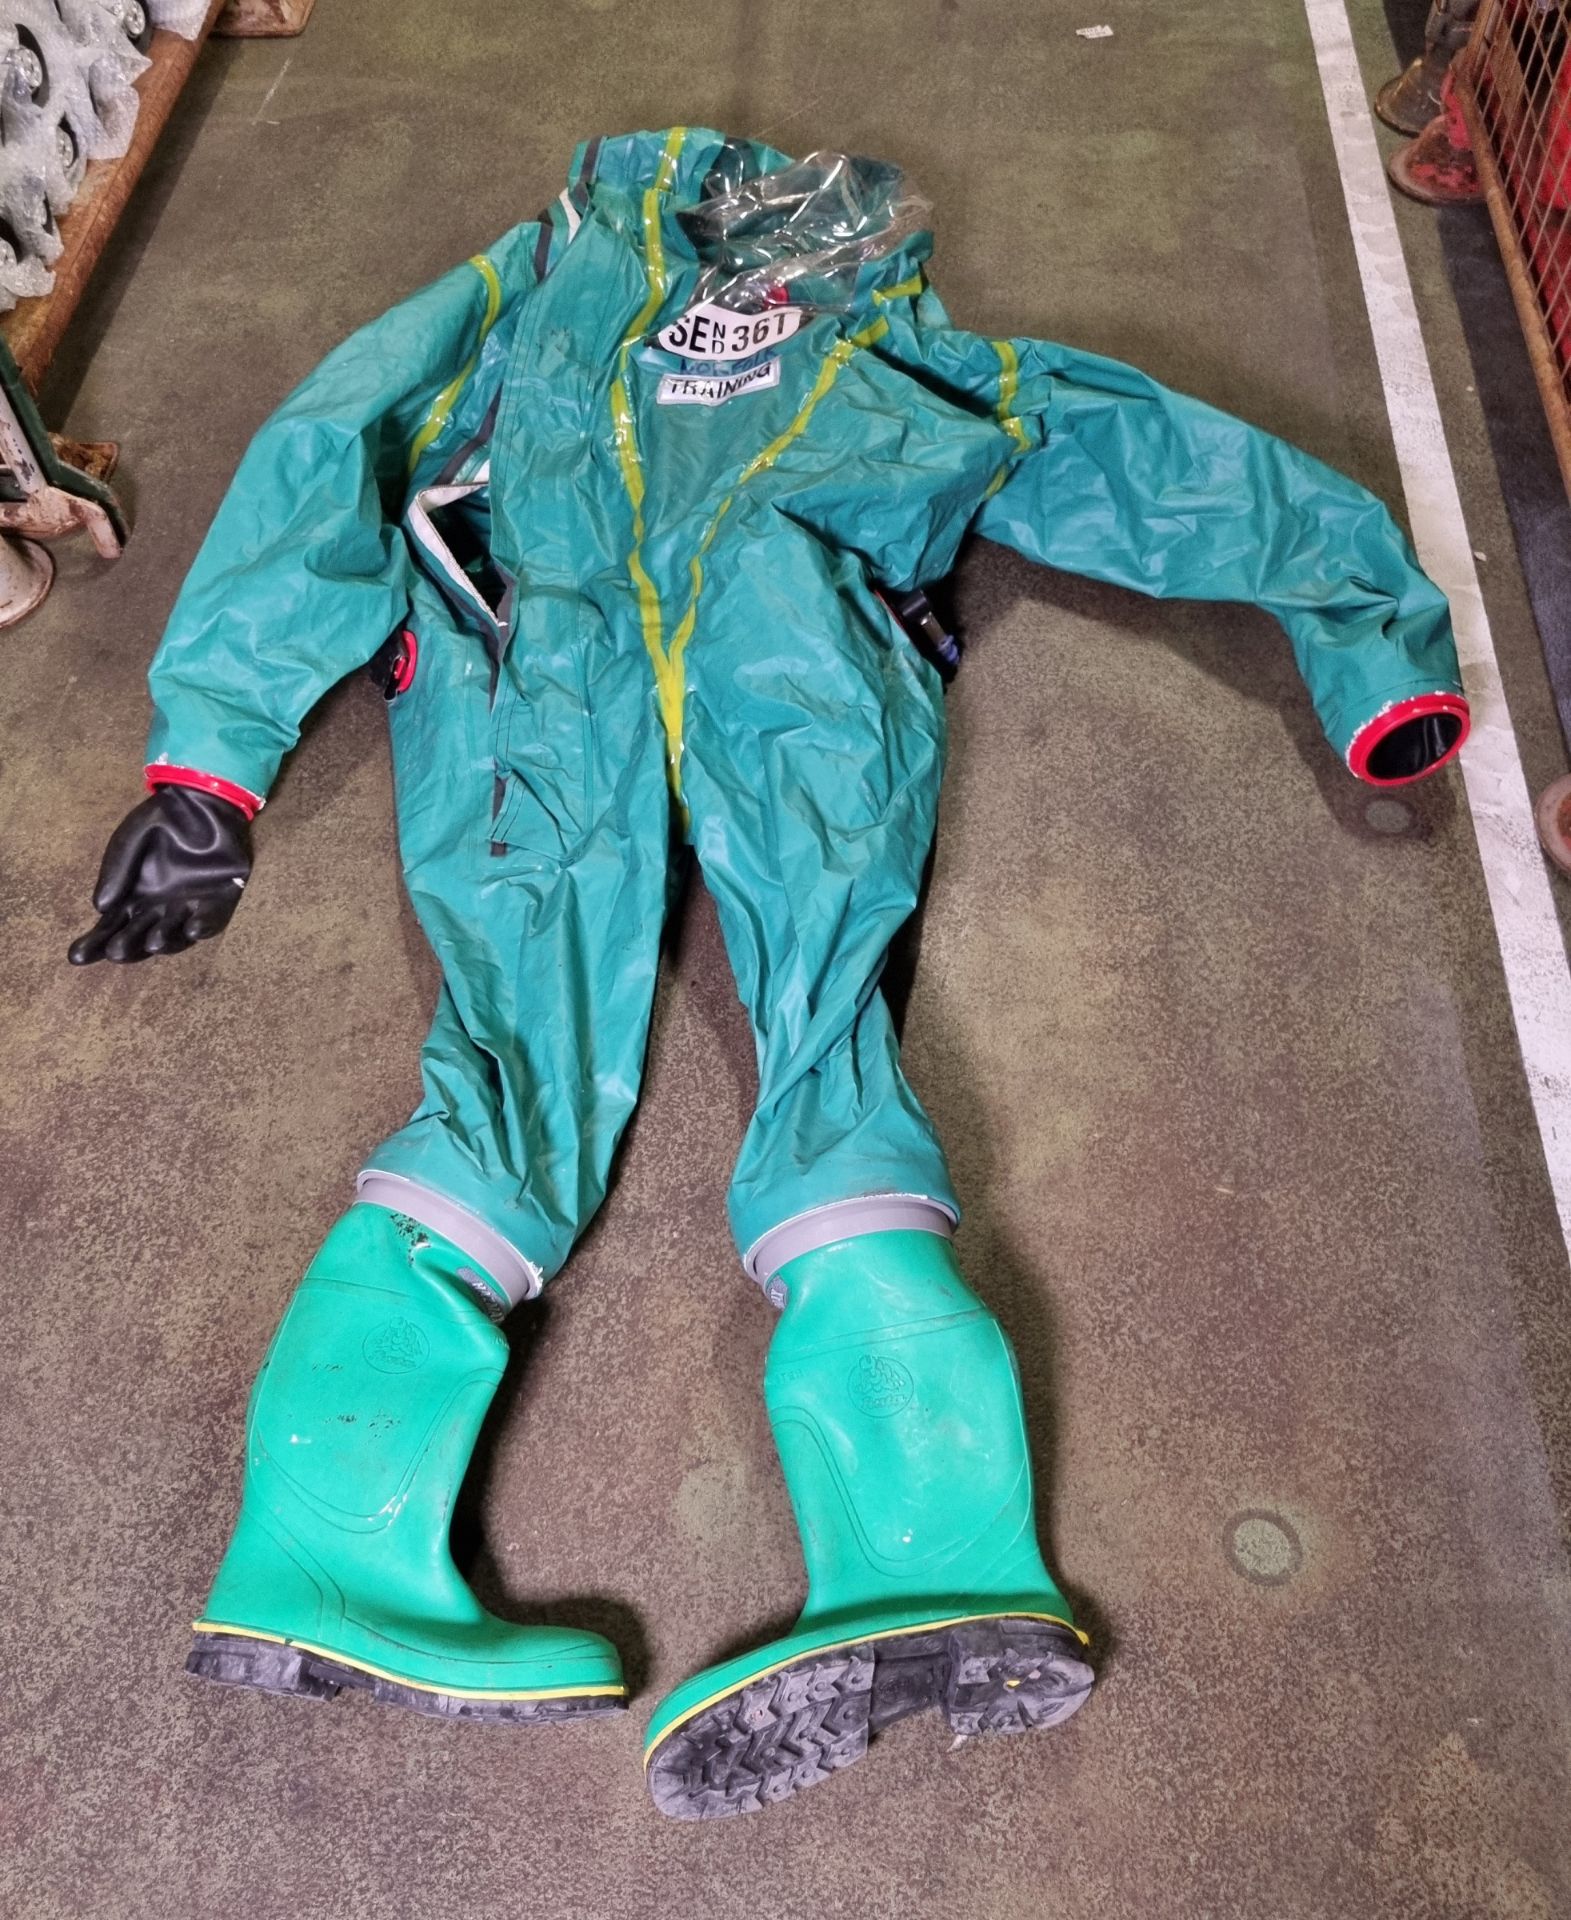 4x Respirex TYFB 021/458 gas tight training suits - size: XL - Image 3 of 4